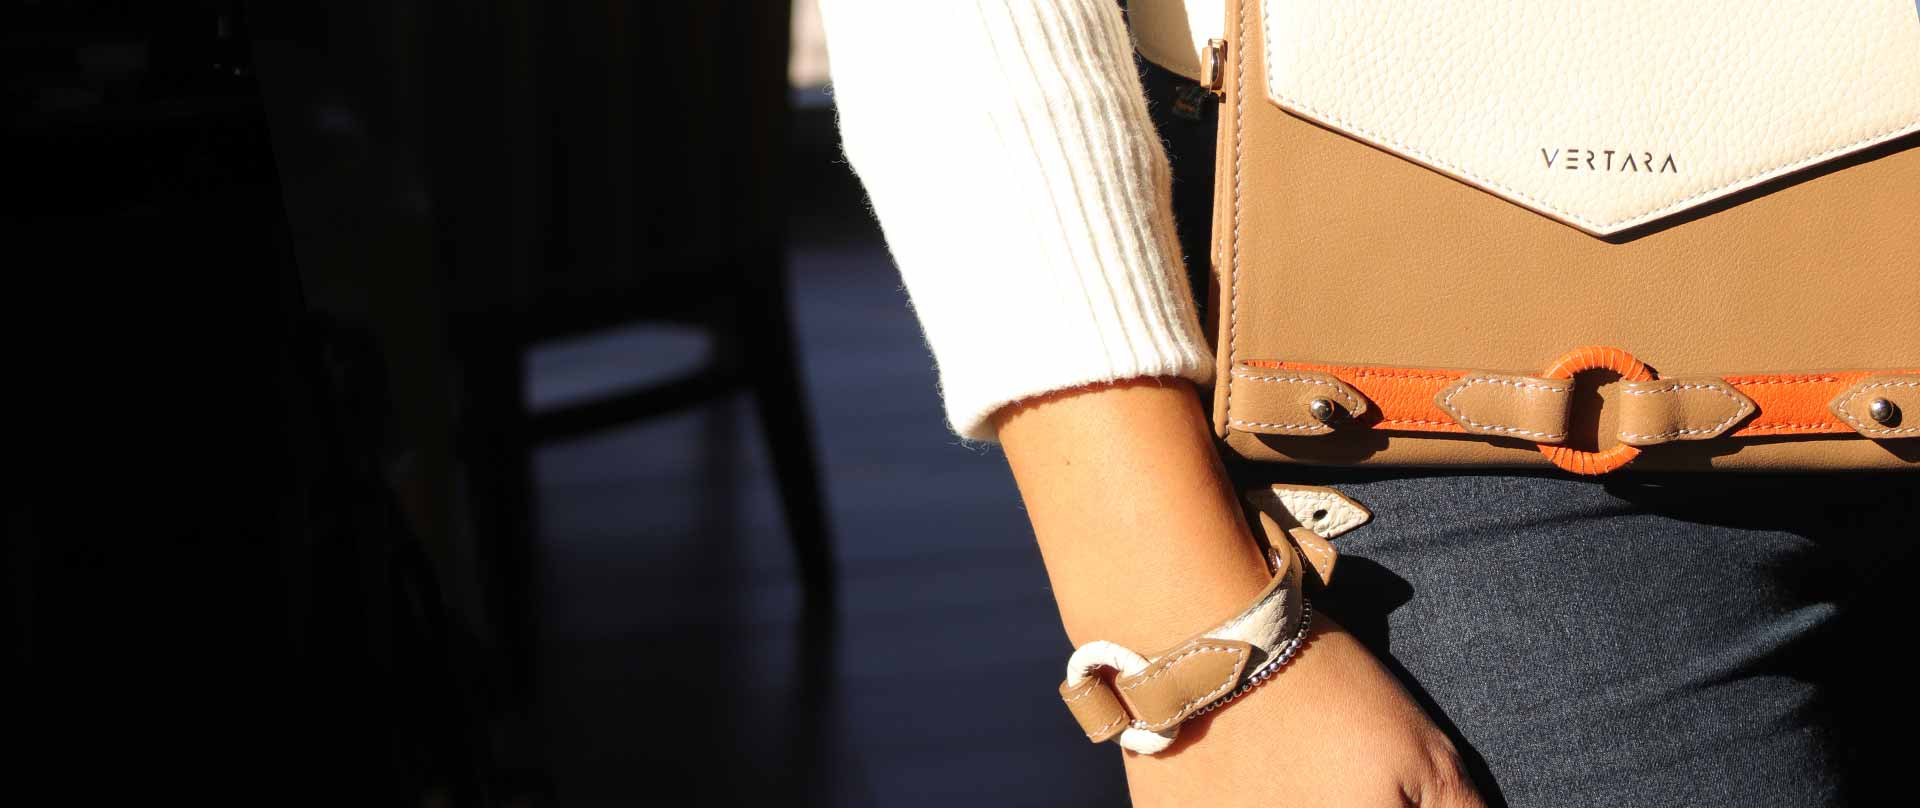 Ember Beige & white Leather Bracelets can be worn as wristband or gets attached to Handsfree Bag & Sleek Wallet